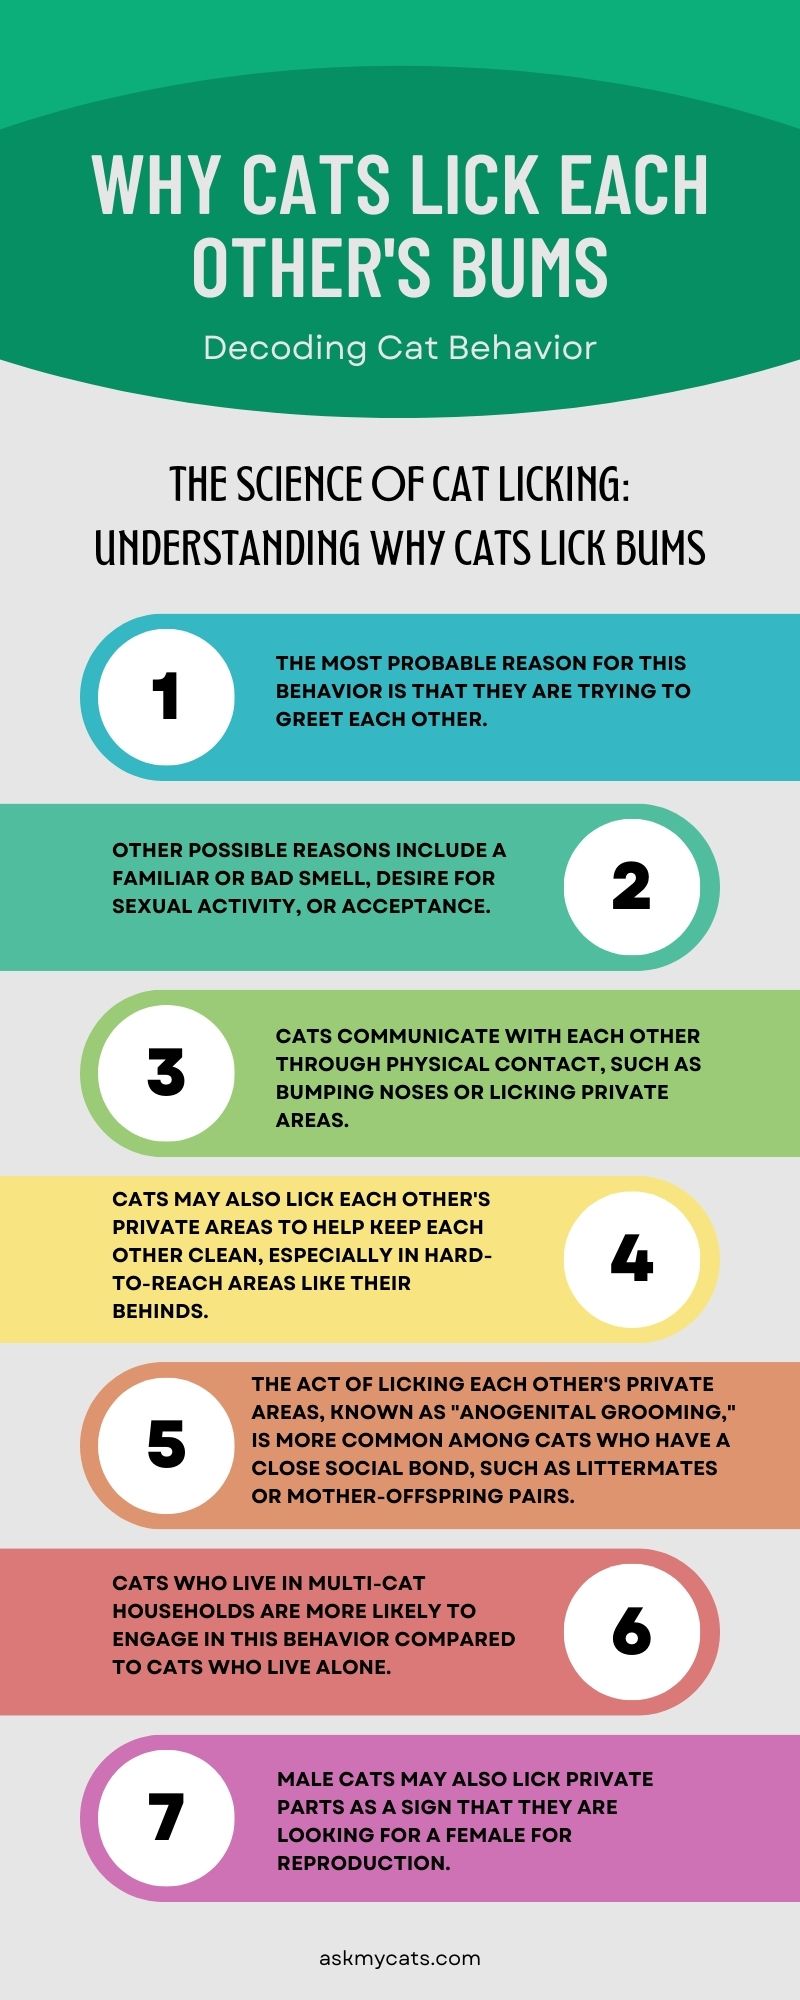 Why Cats Lick Each Other's Bums